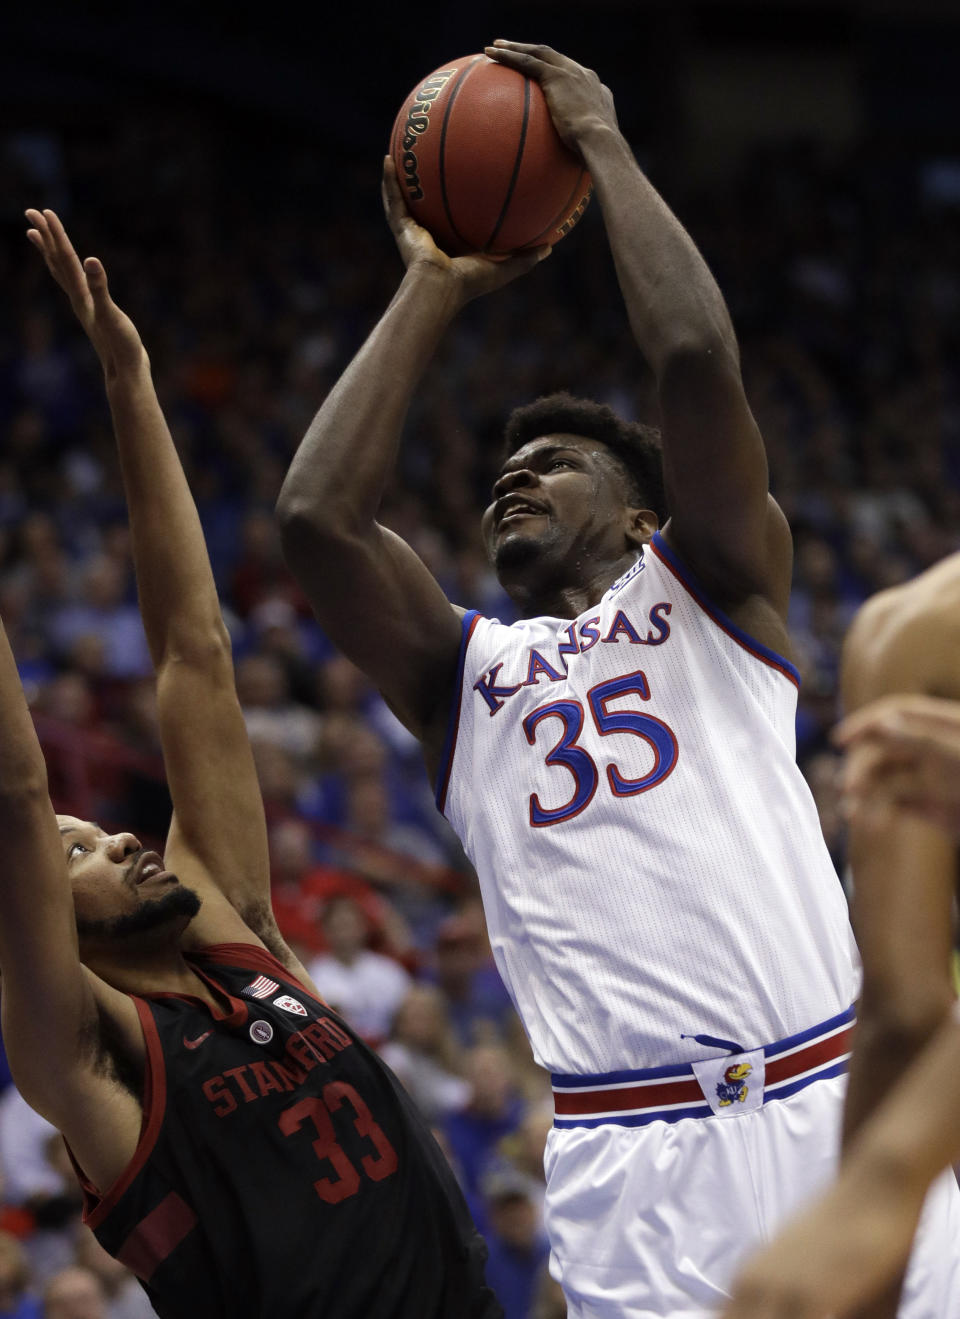 Kansas center Udoka Azubuike (35) shoots over Stanford forward Trevor Stanback (33) during the first half of an NCAA college basketball game in Lawrence, Kan., Saturday, Dec. 1, 2018. (AP Photo/Orlin Wagner)